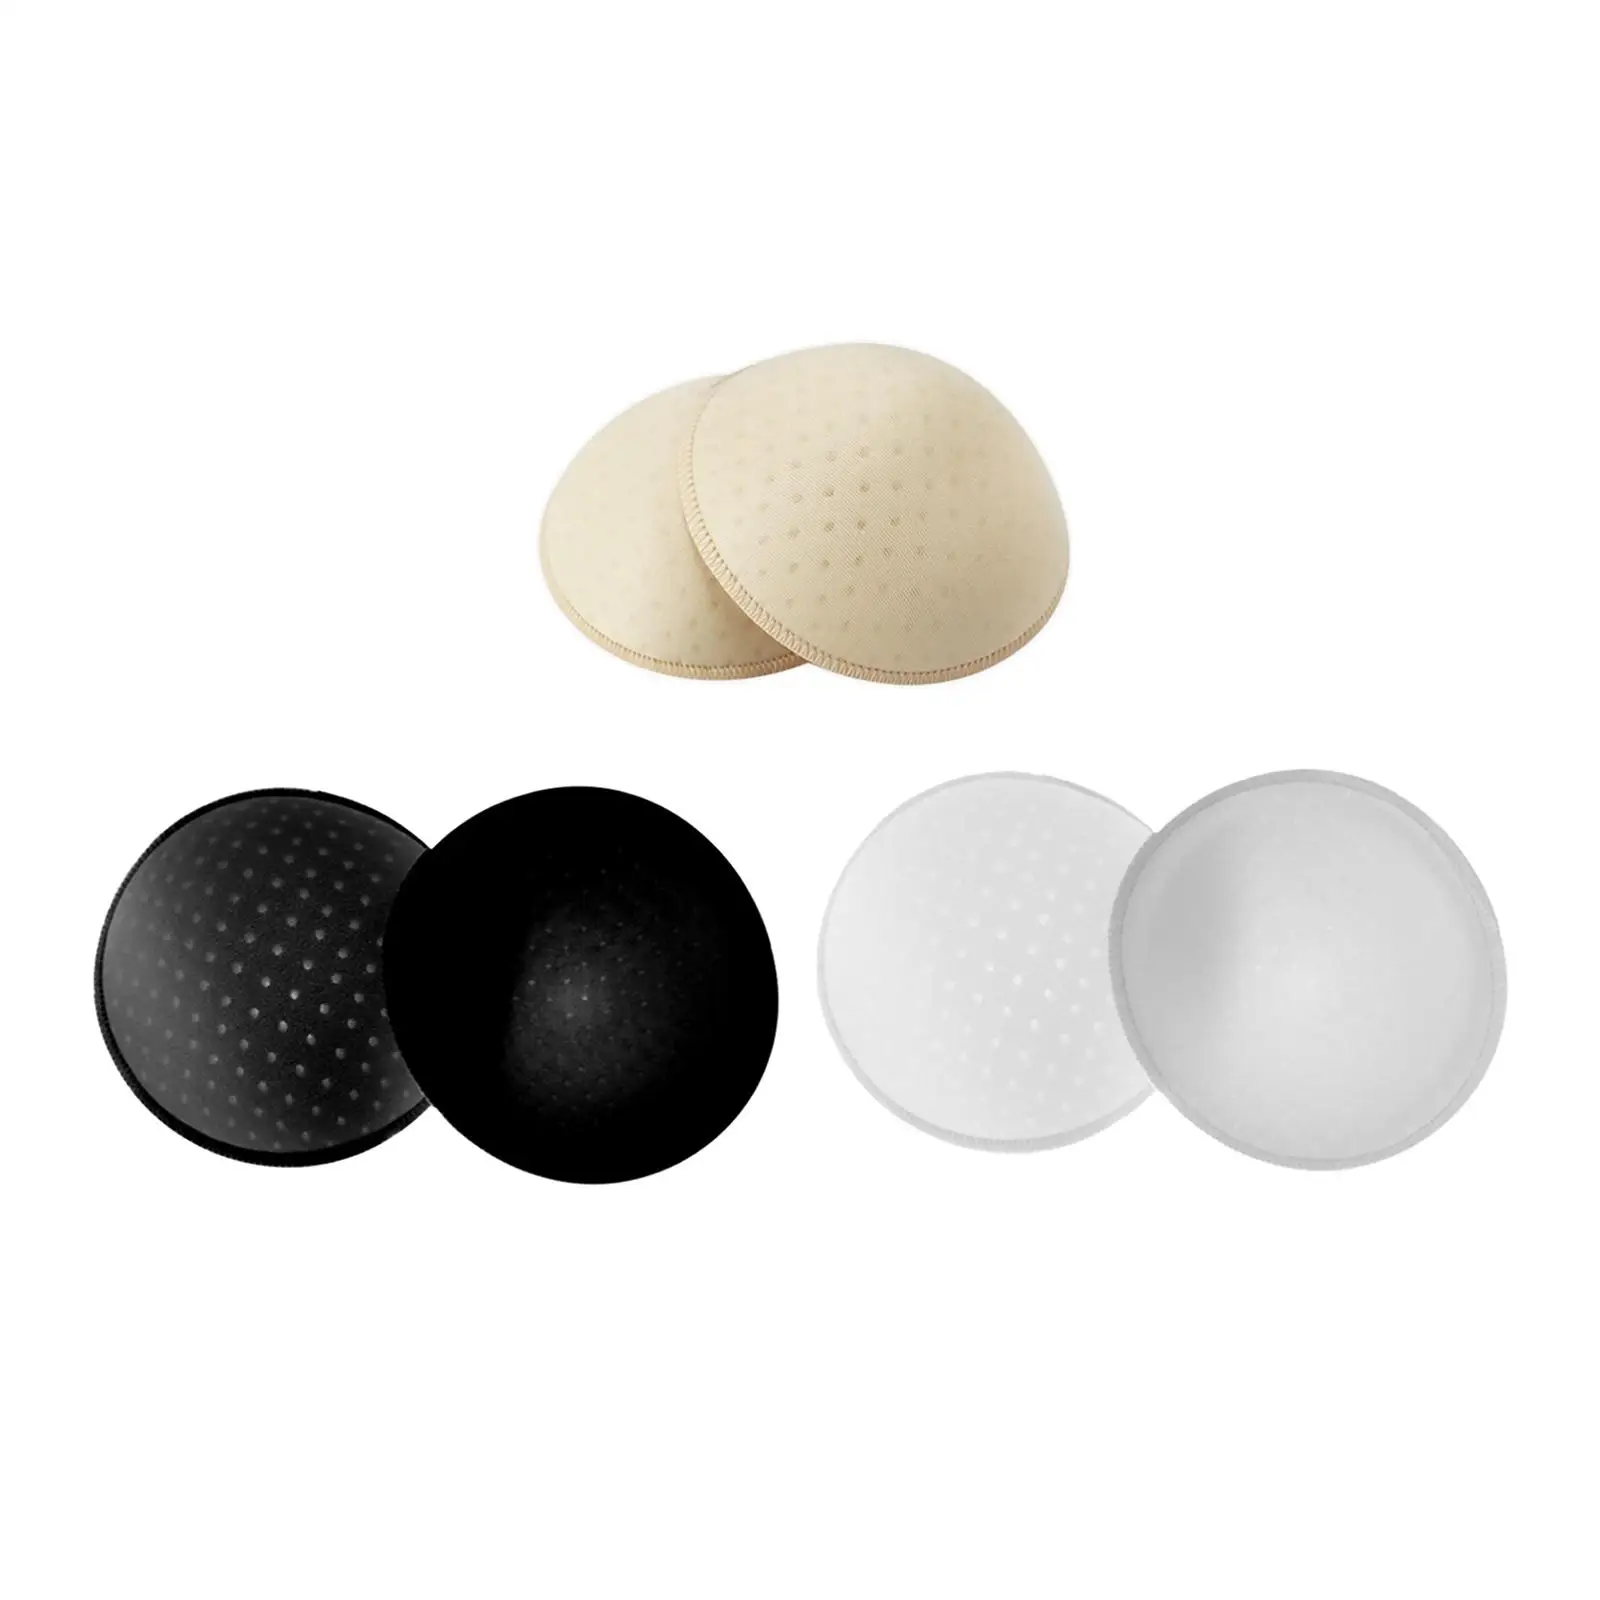 ETOPARS 3 Pairs Bra Pads Inserts Replacement Removable Bra Push Up Pads for Sports Bras Swimsuits Bikini Tops Bathing Suits 